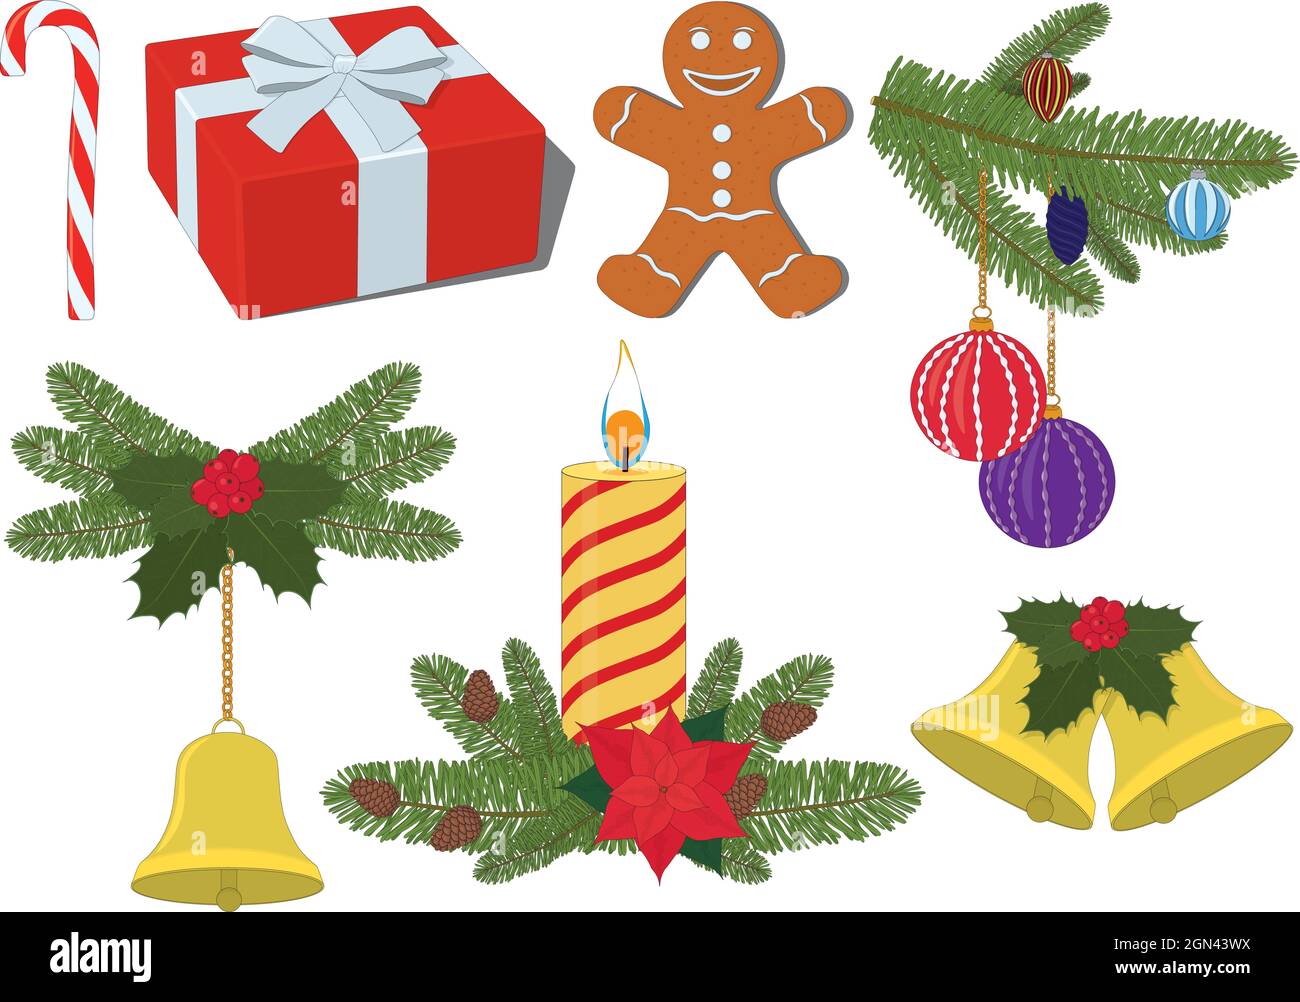 Christmas and new year decorations vector illustration Stock Vector ...